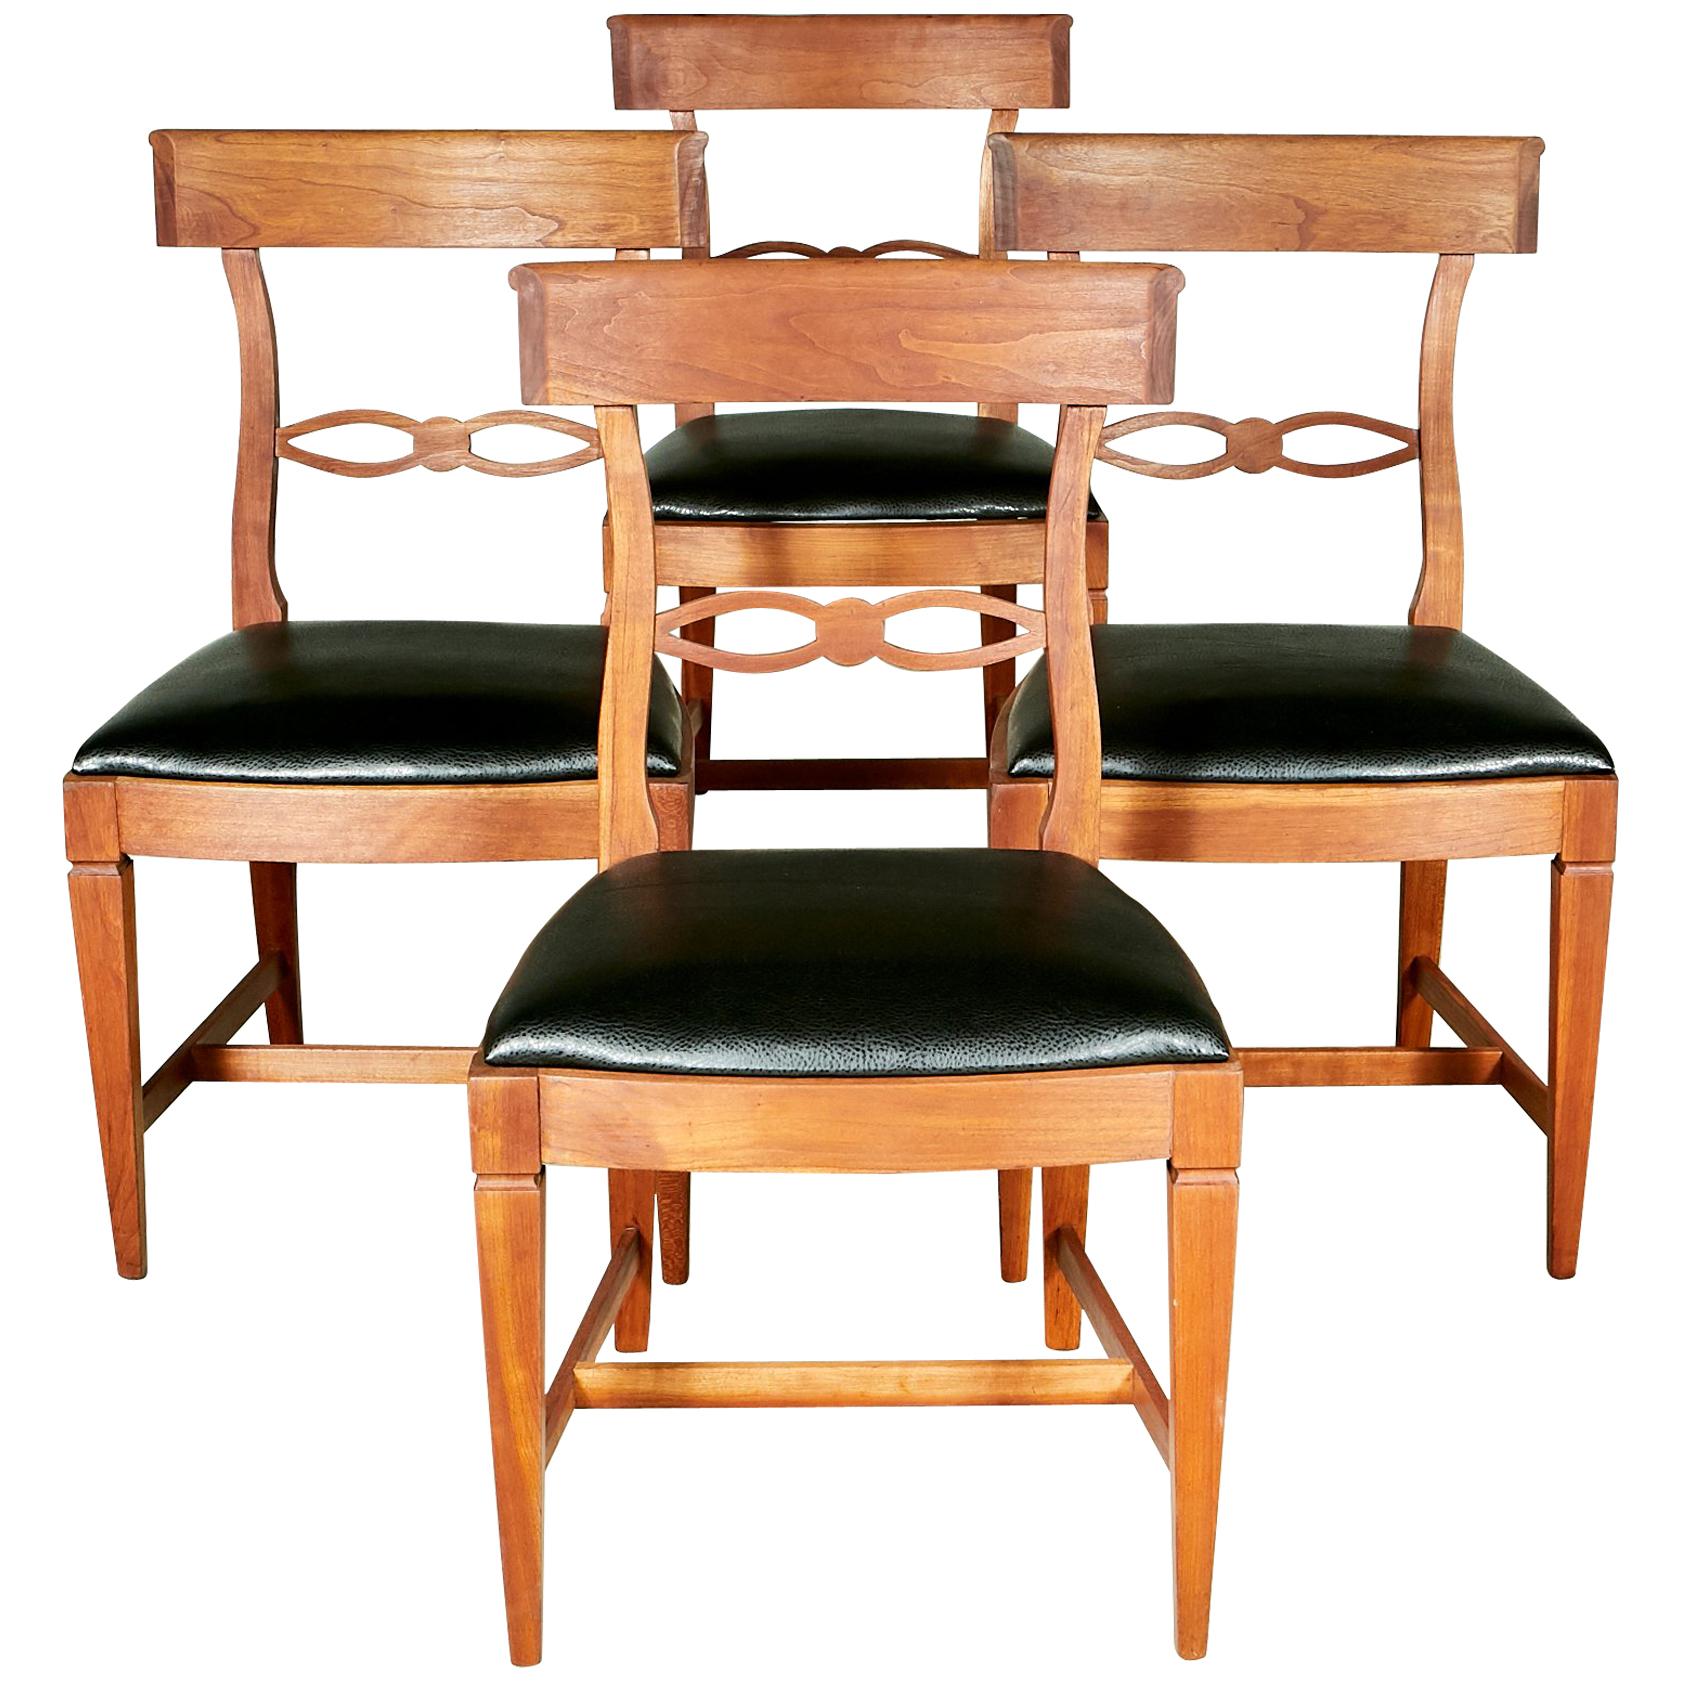 1950s Kindel Cherrywood Dining Room Chairs, Set of 4 For Sale